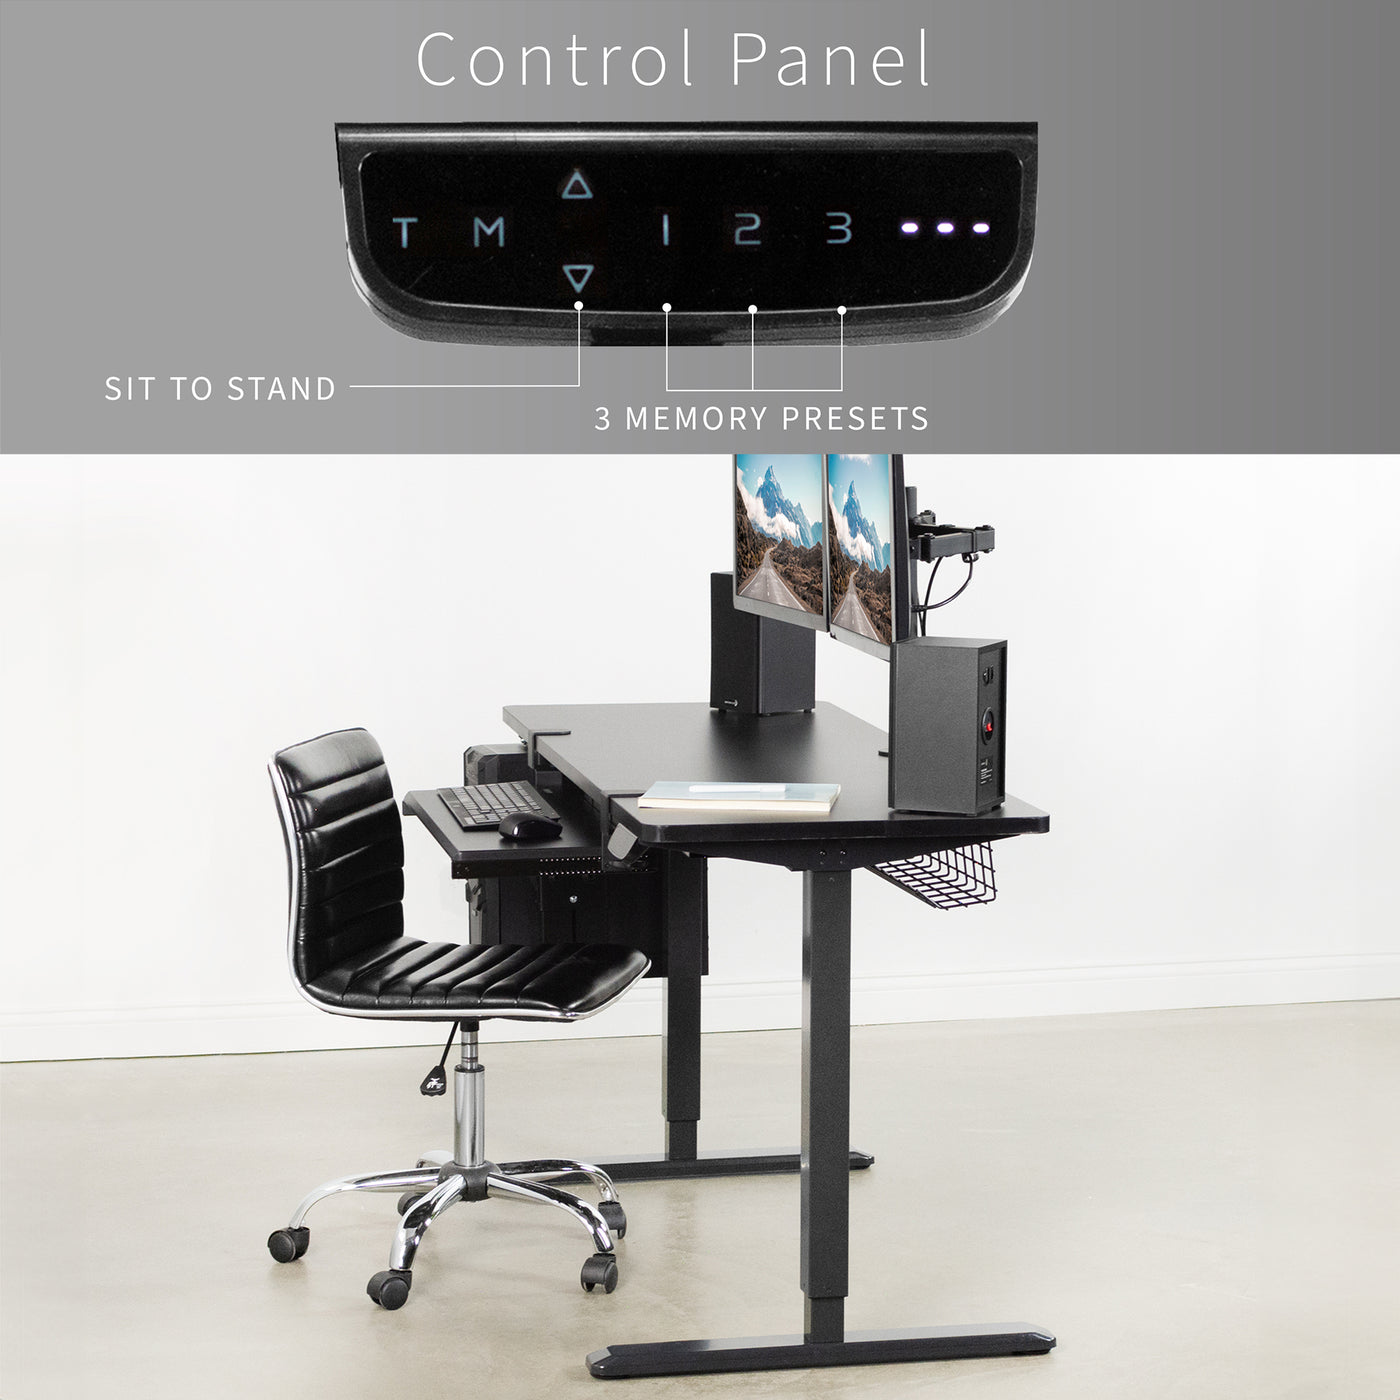 Smart controller panel with a power-saving mode, timer reminder, and programmable settings.